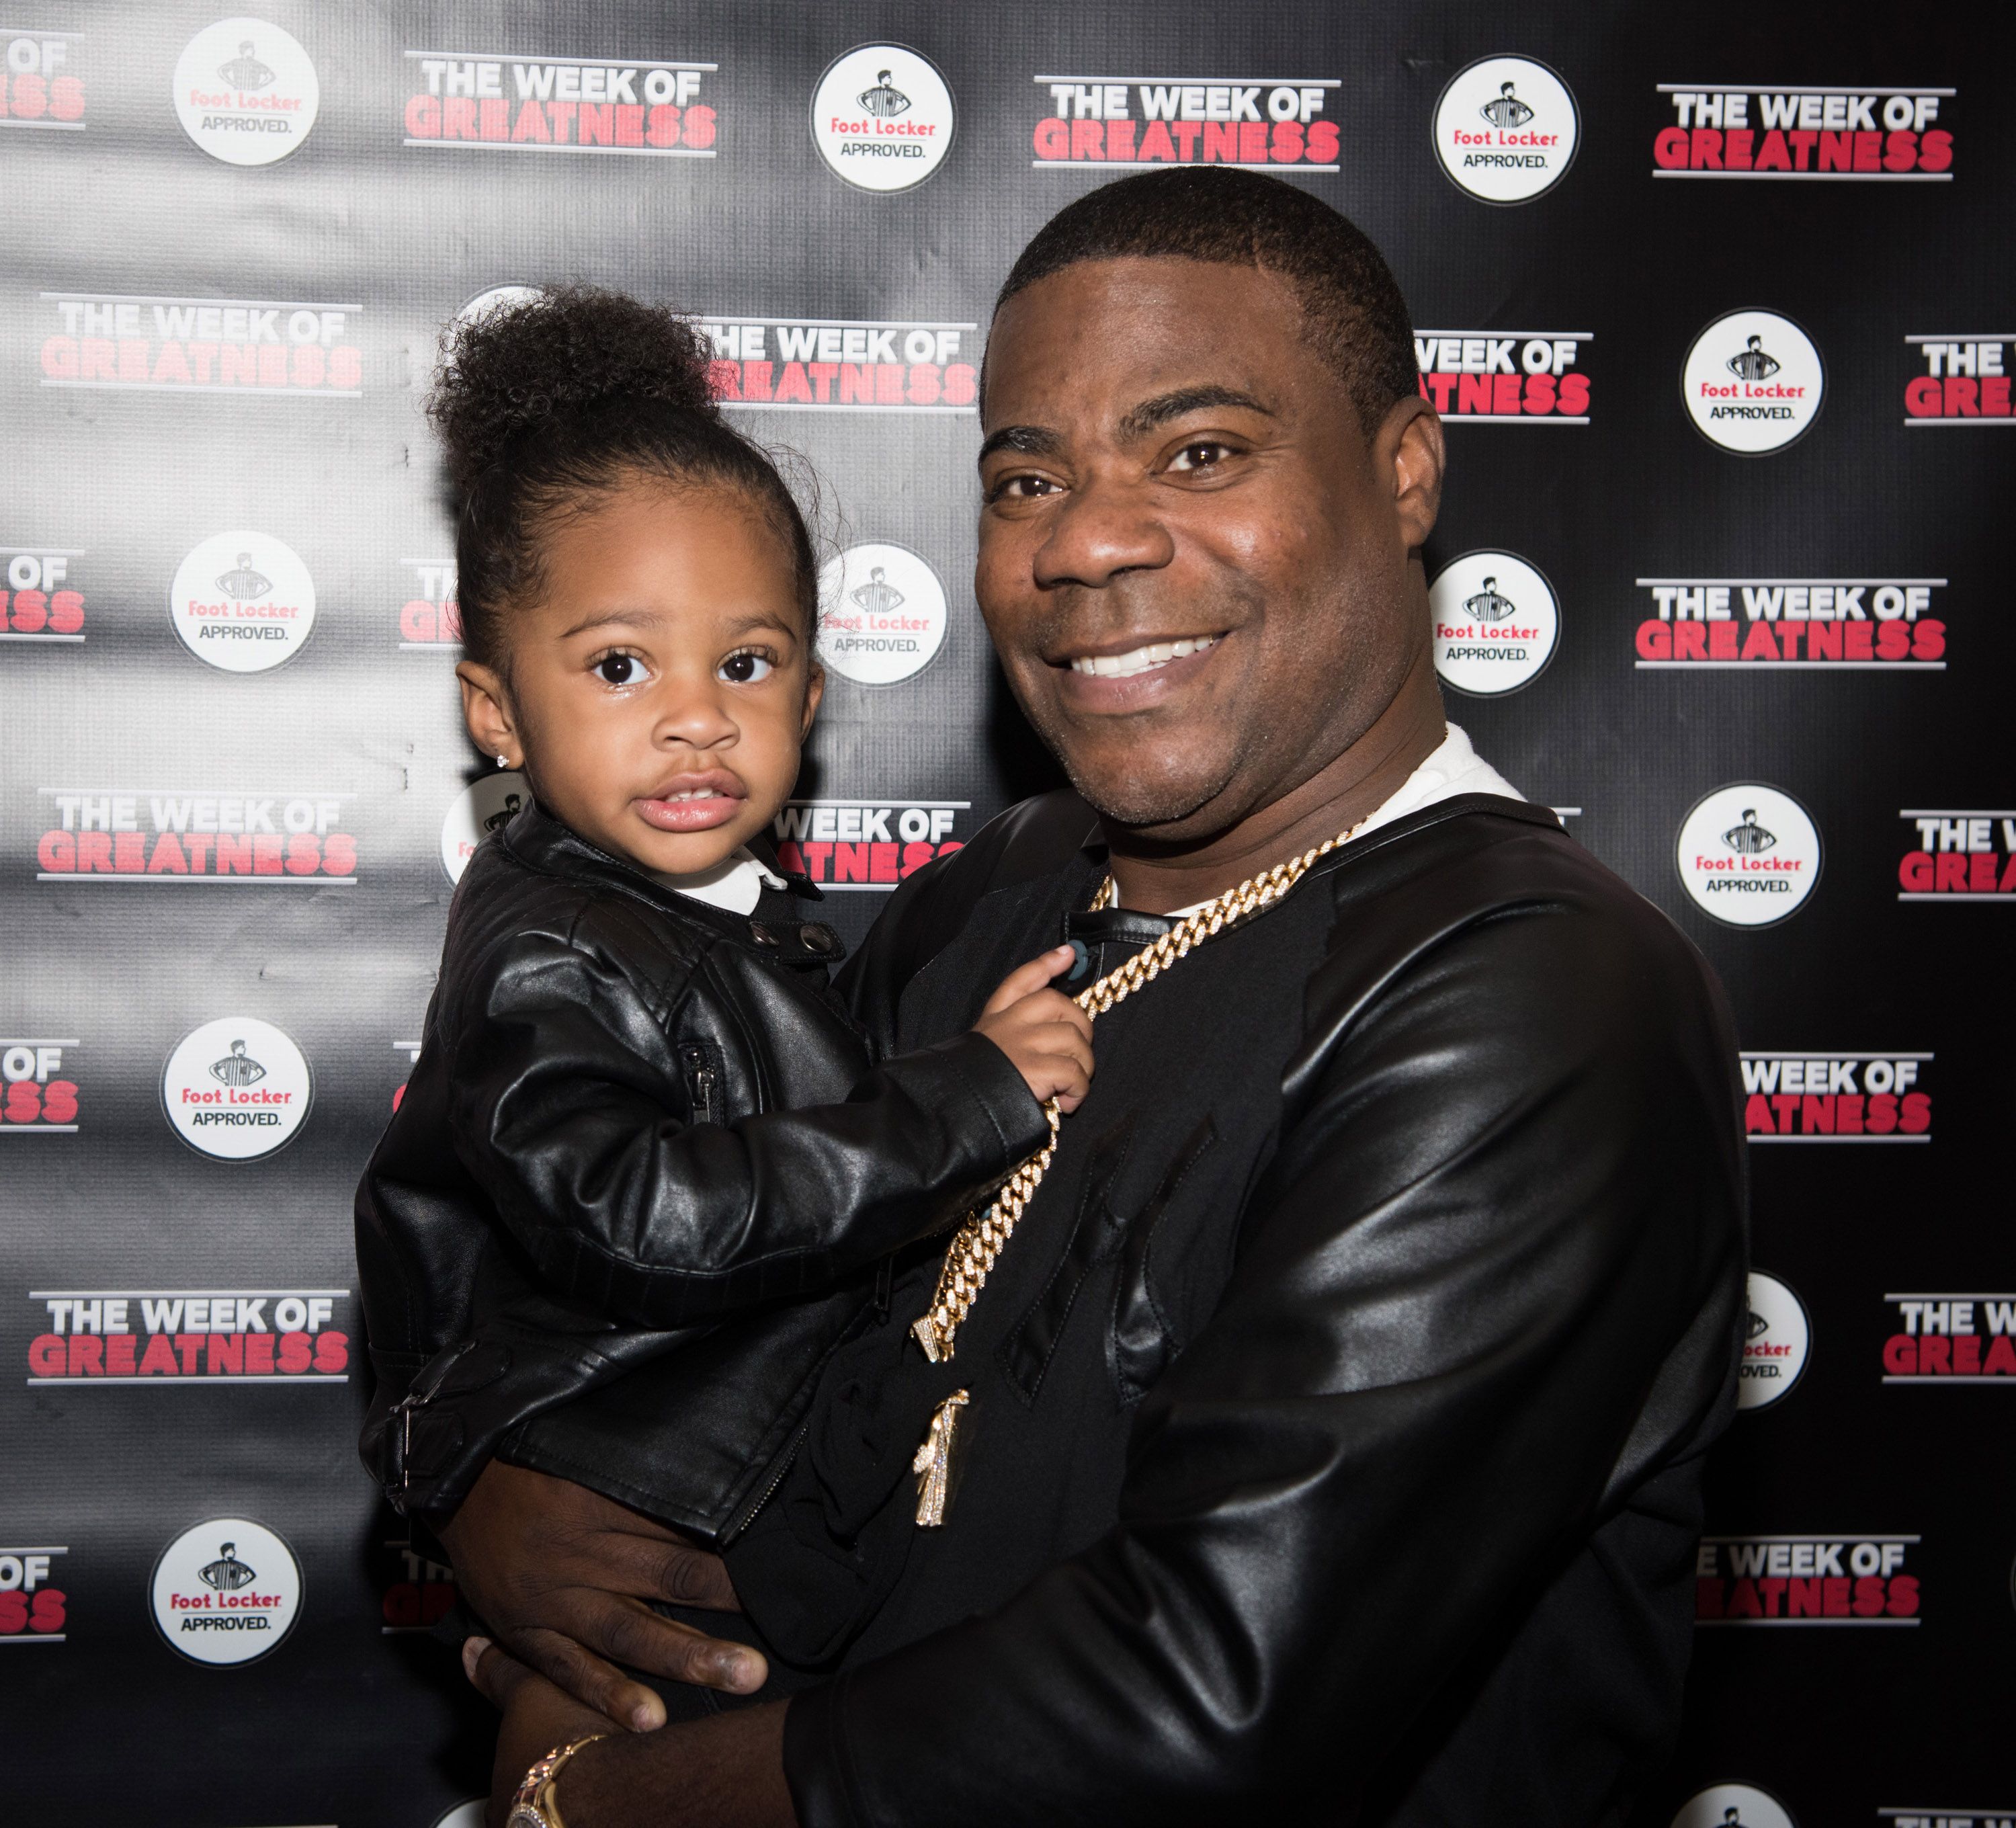 Tracy Morgan and daughter Maven at the Fourth Annual Week of Greatness Kick Off Event in New York City in 2015. | Photo: Getty Images